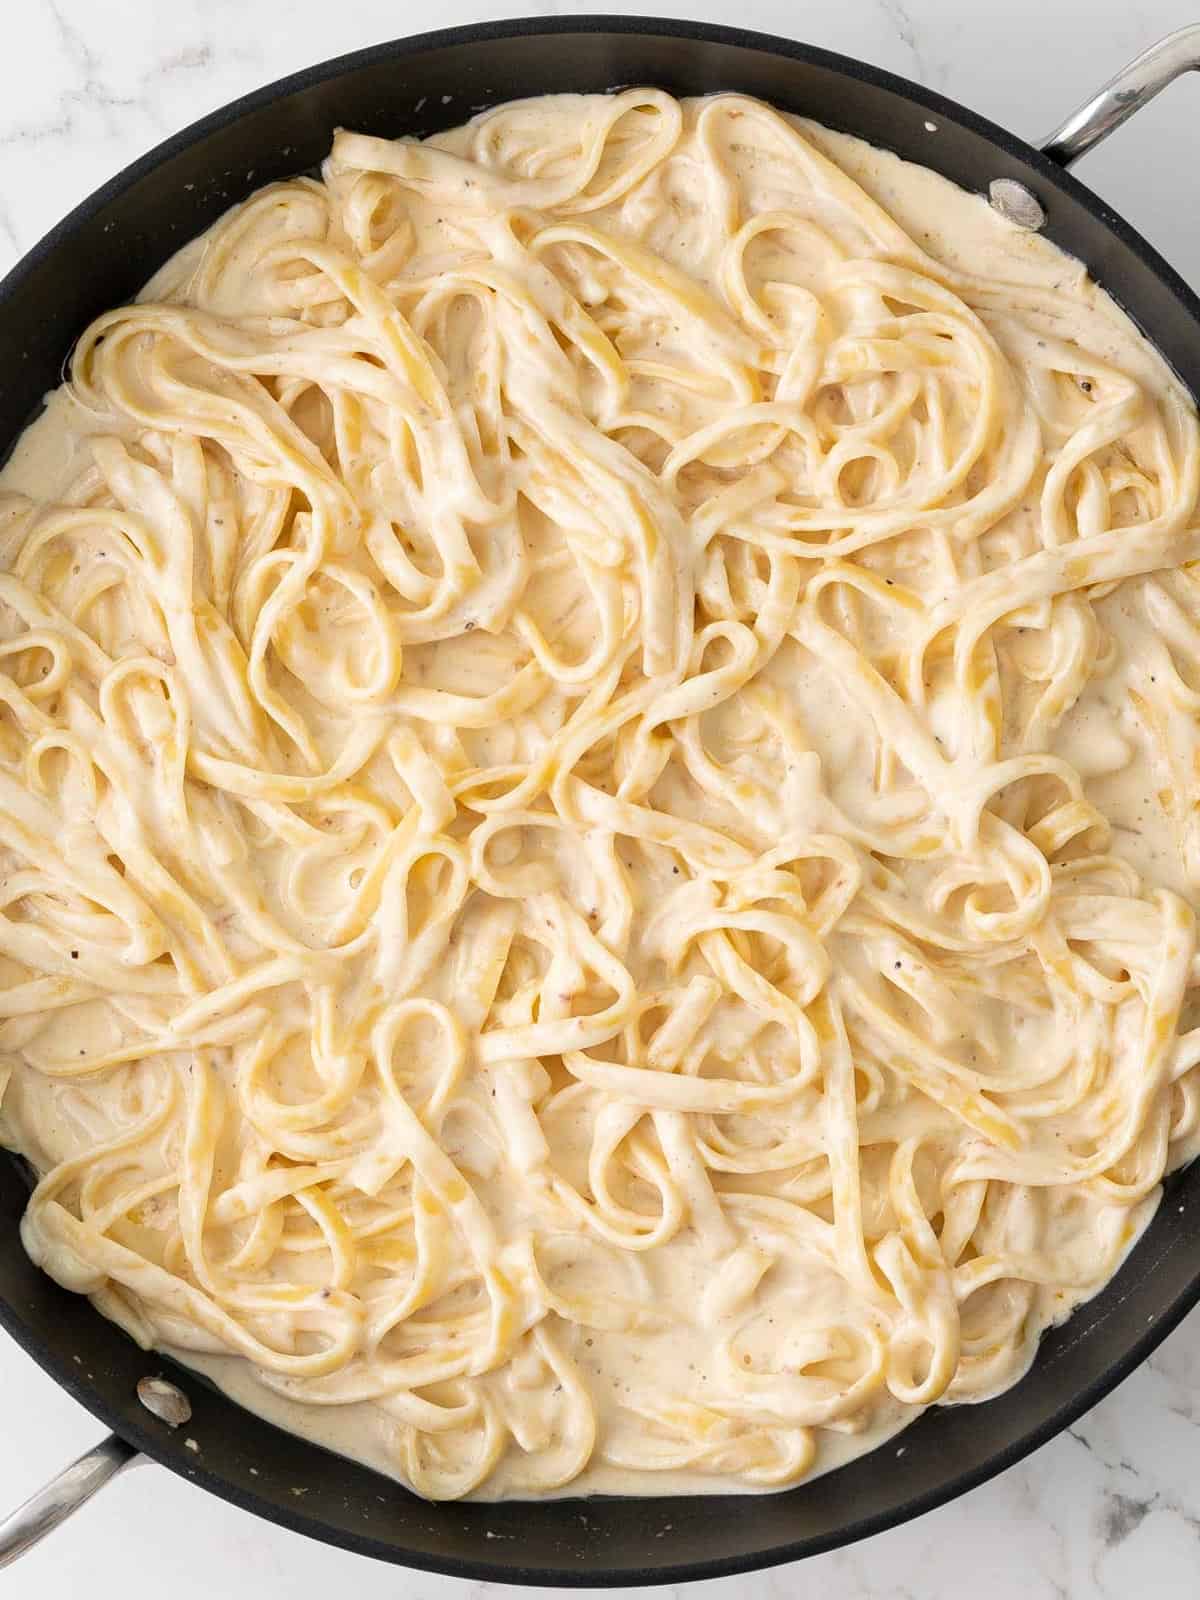 Fettuccine pasta tossed with alfredo sauce in a skillet.